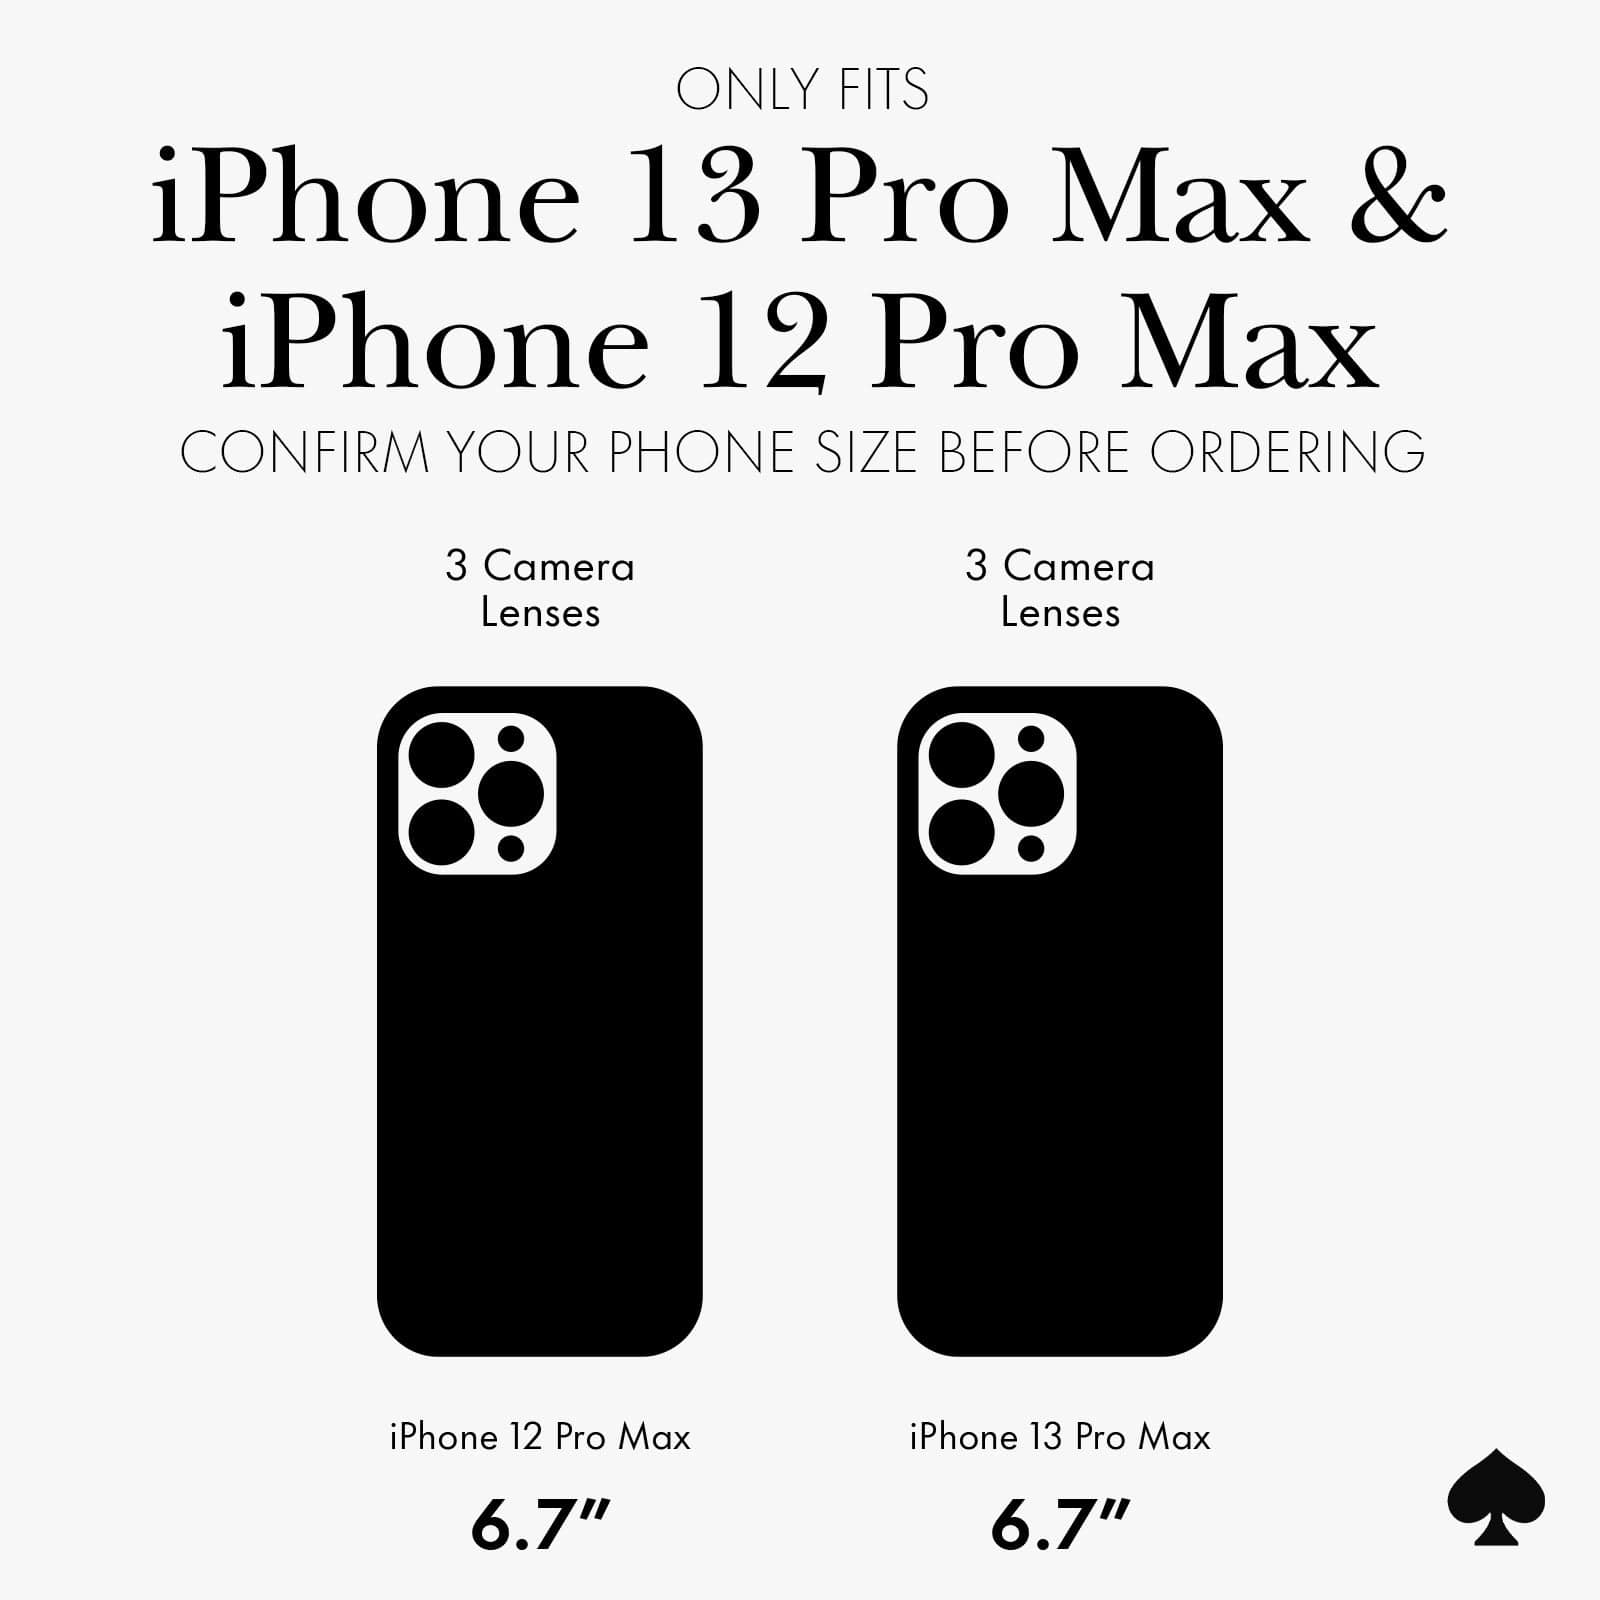 only fits iphone 13 pro max and iphone 12 pro max